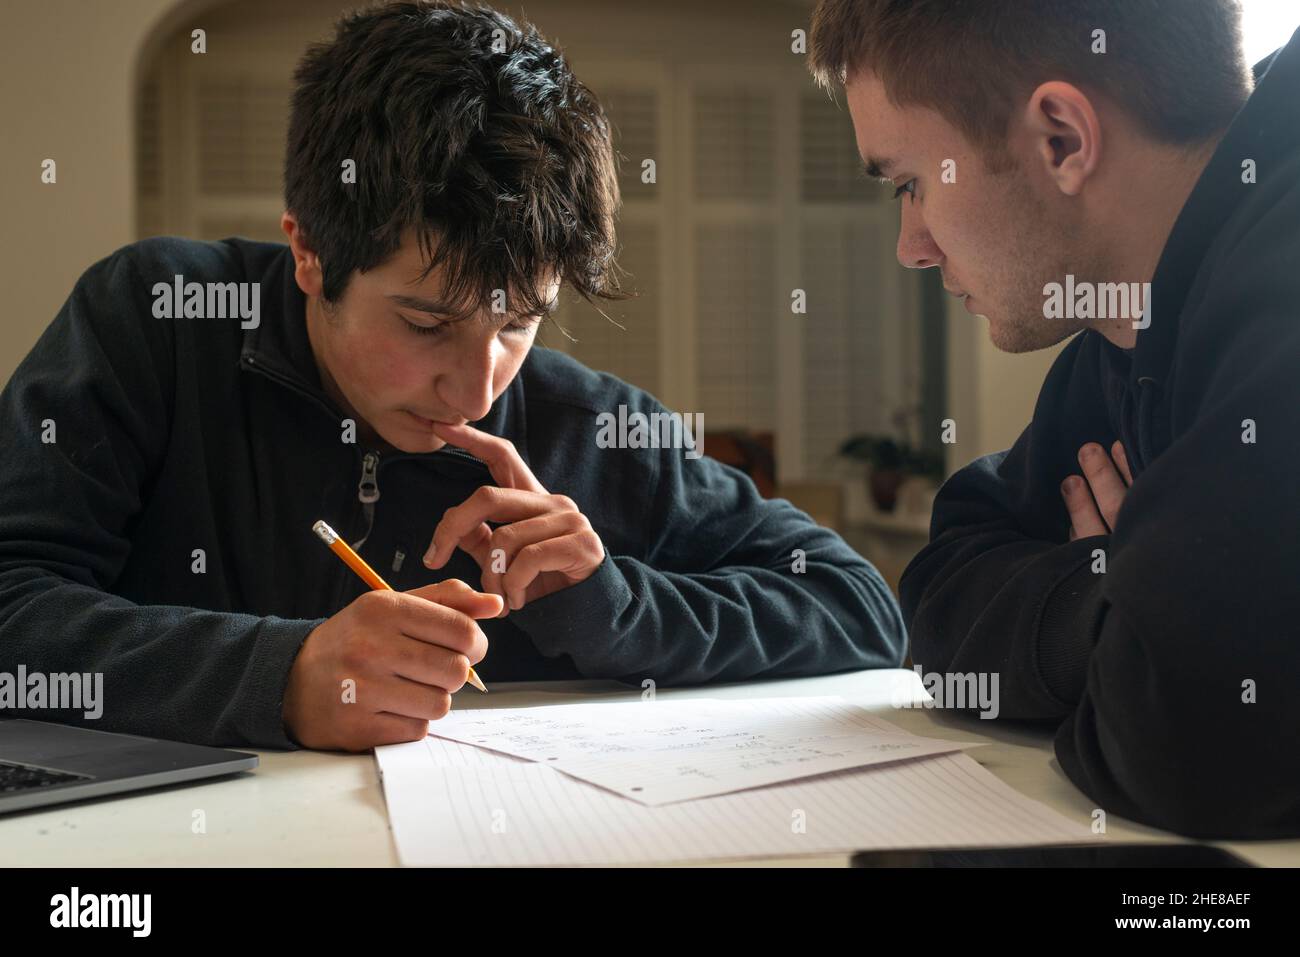 Boys study together. older student helps with homework Stock Photo